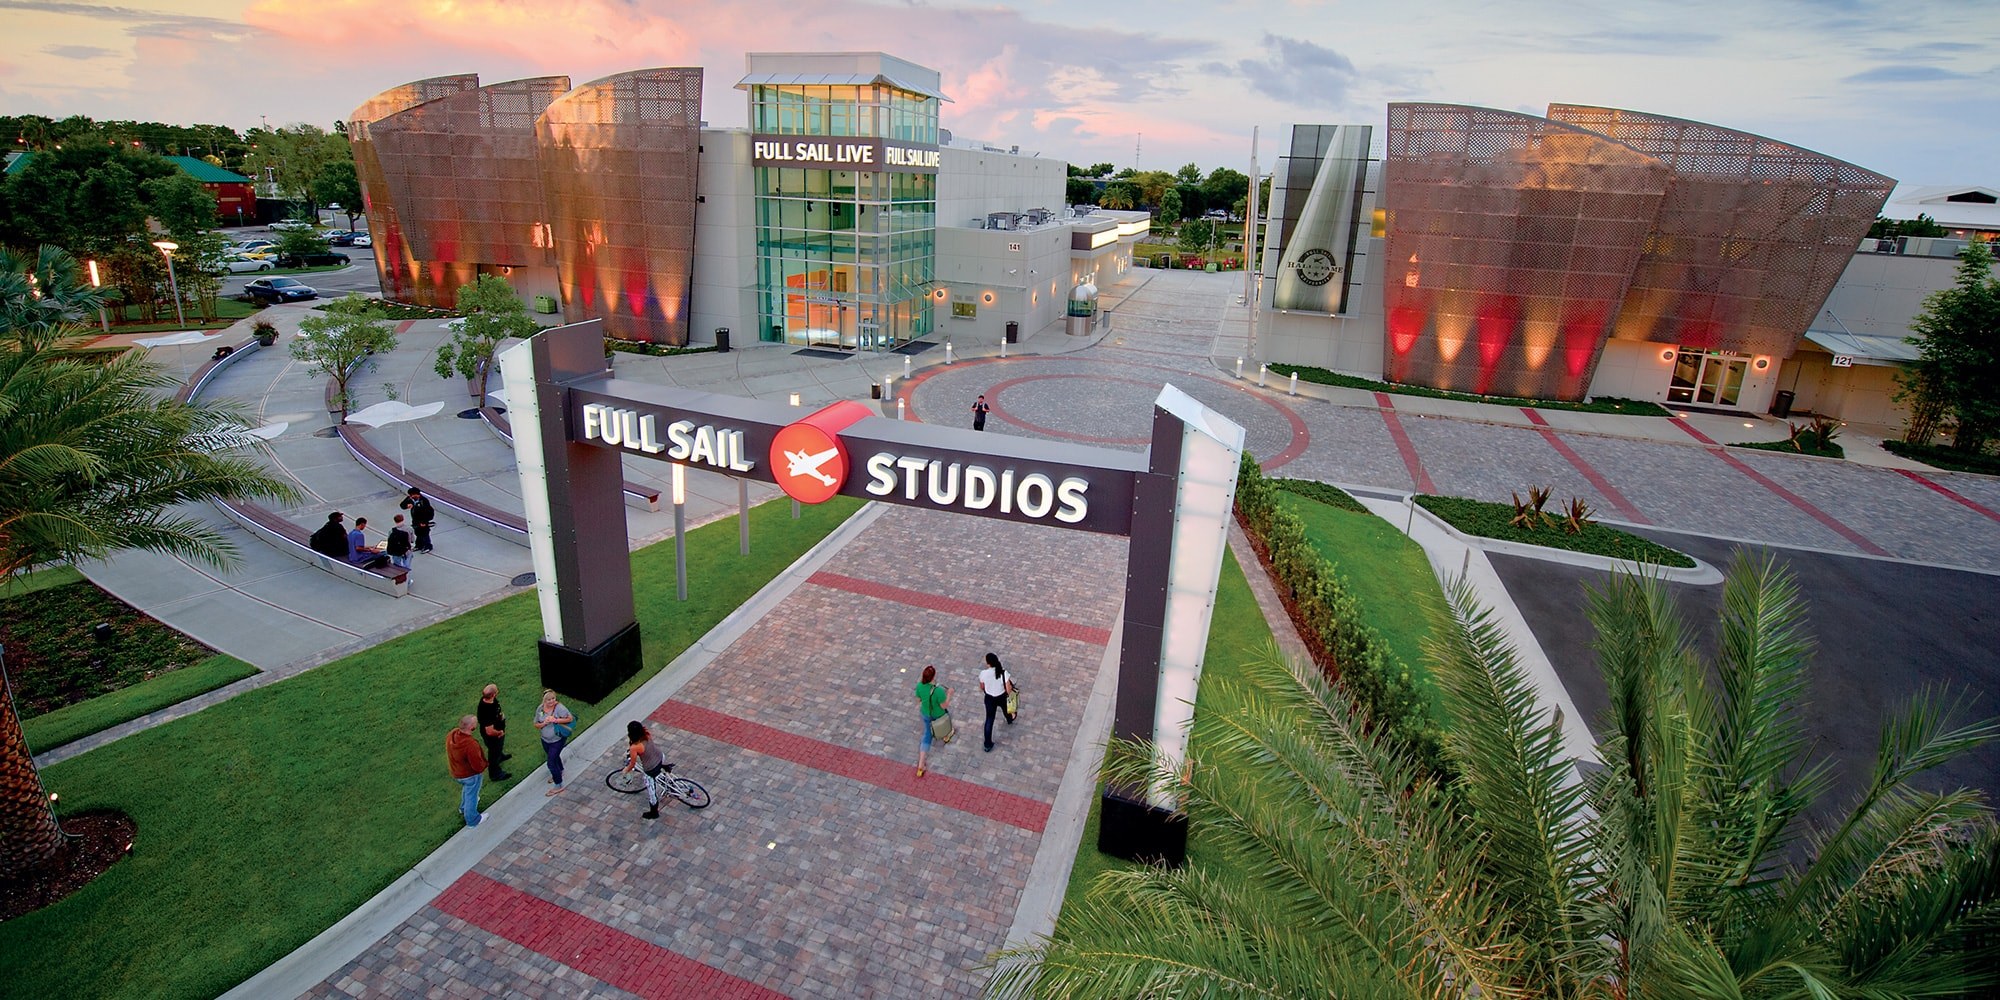 Top 10 Clubs and Events at the Full Sail University - OneClass Blog